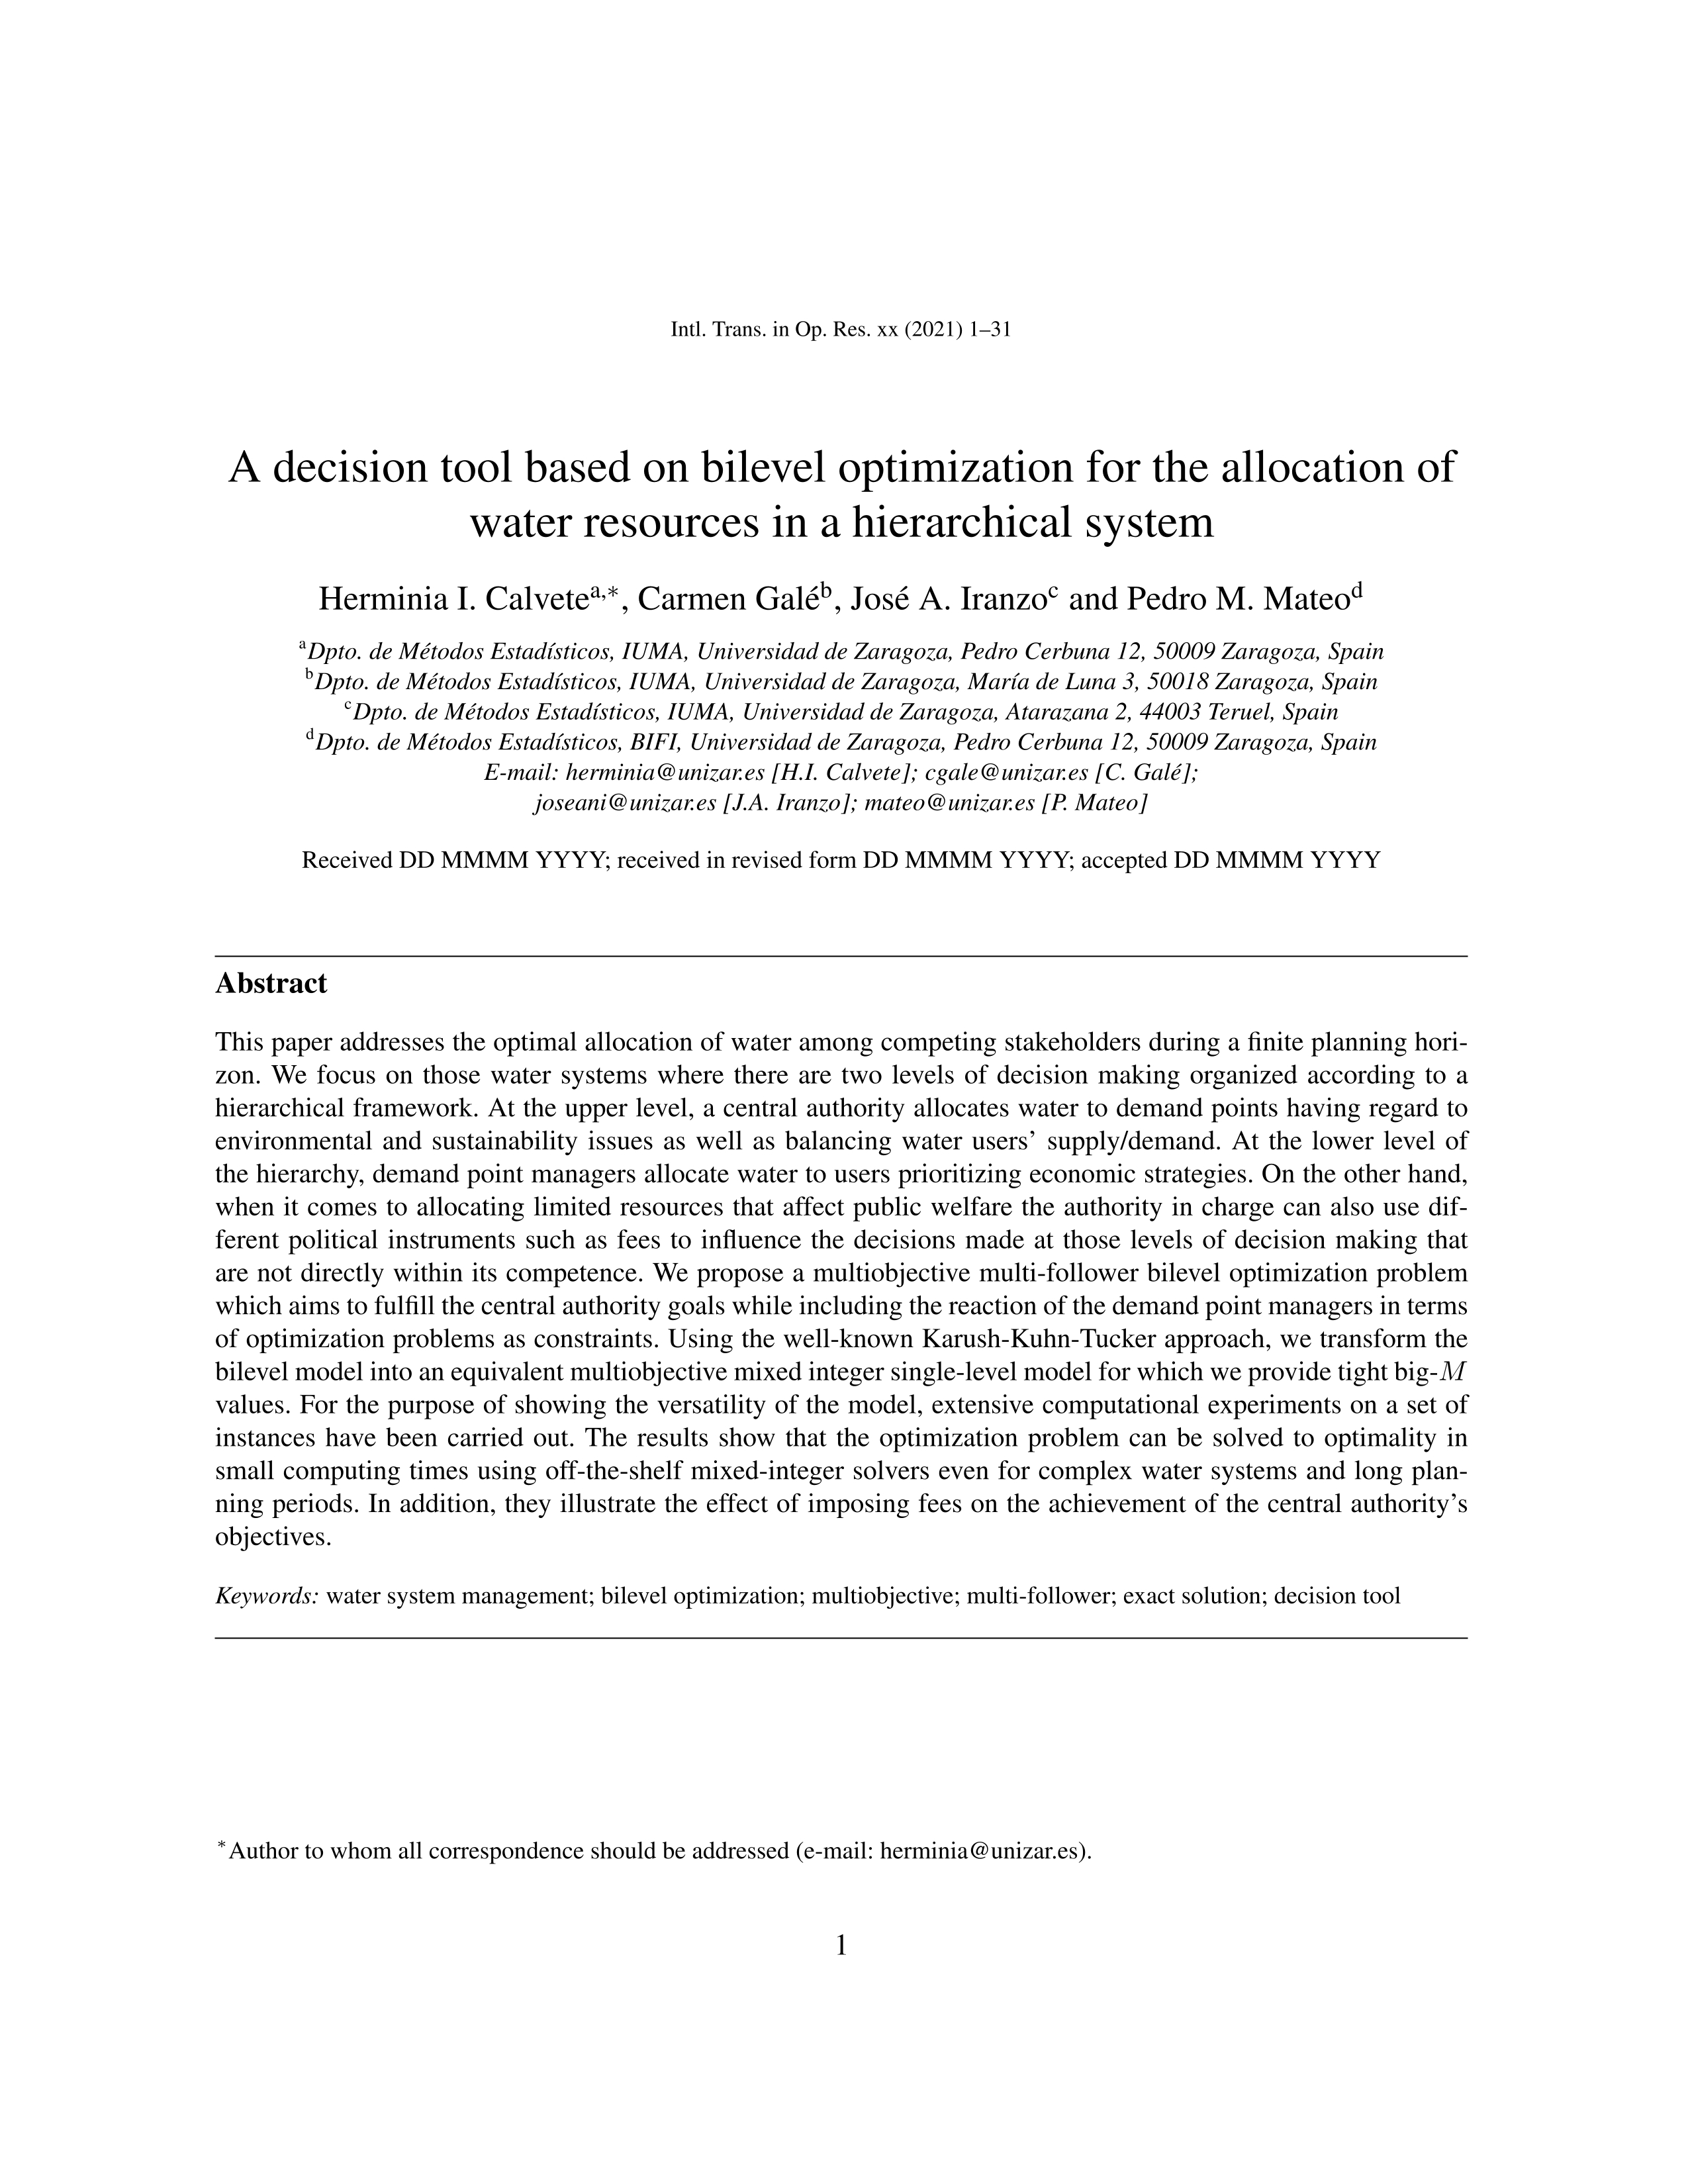 A decision tool based on bilevel optimization for the allocation of water resources in a hierarchical system